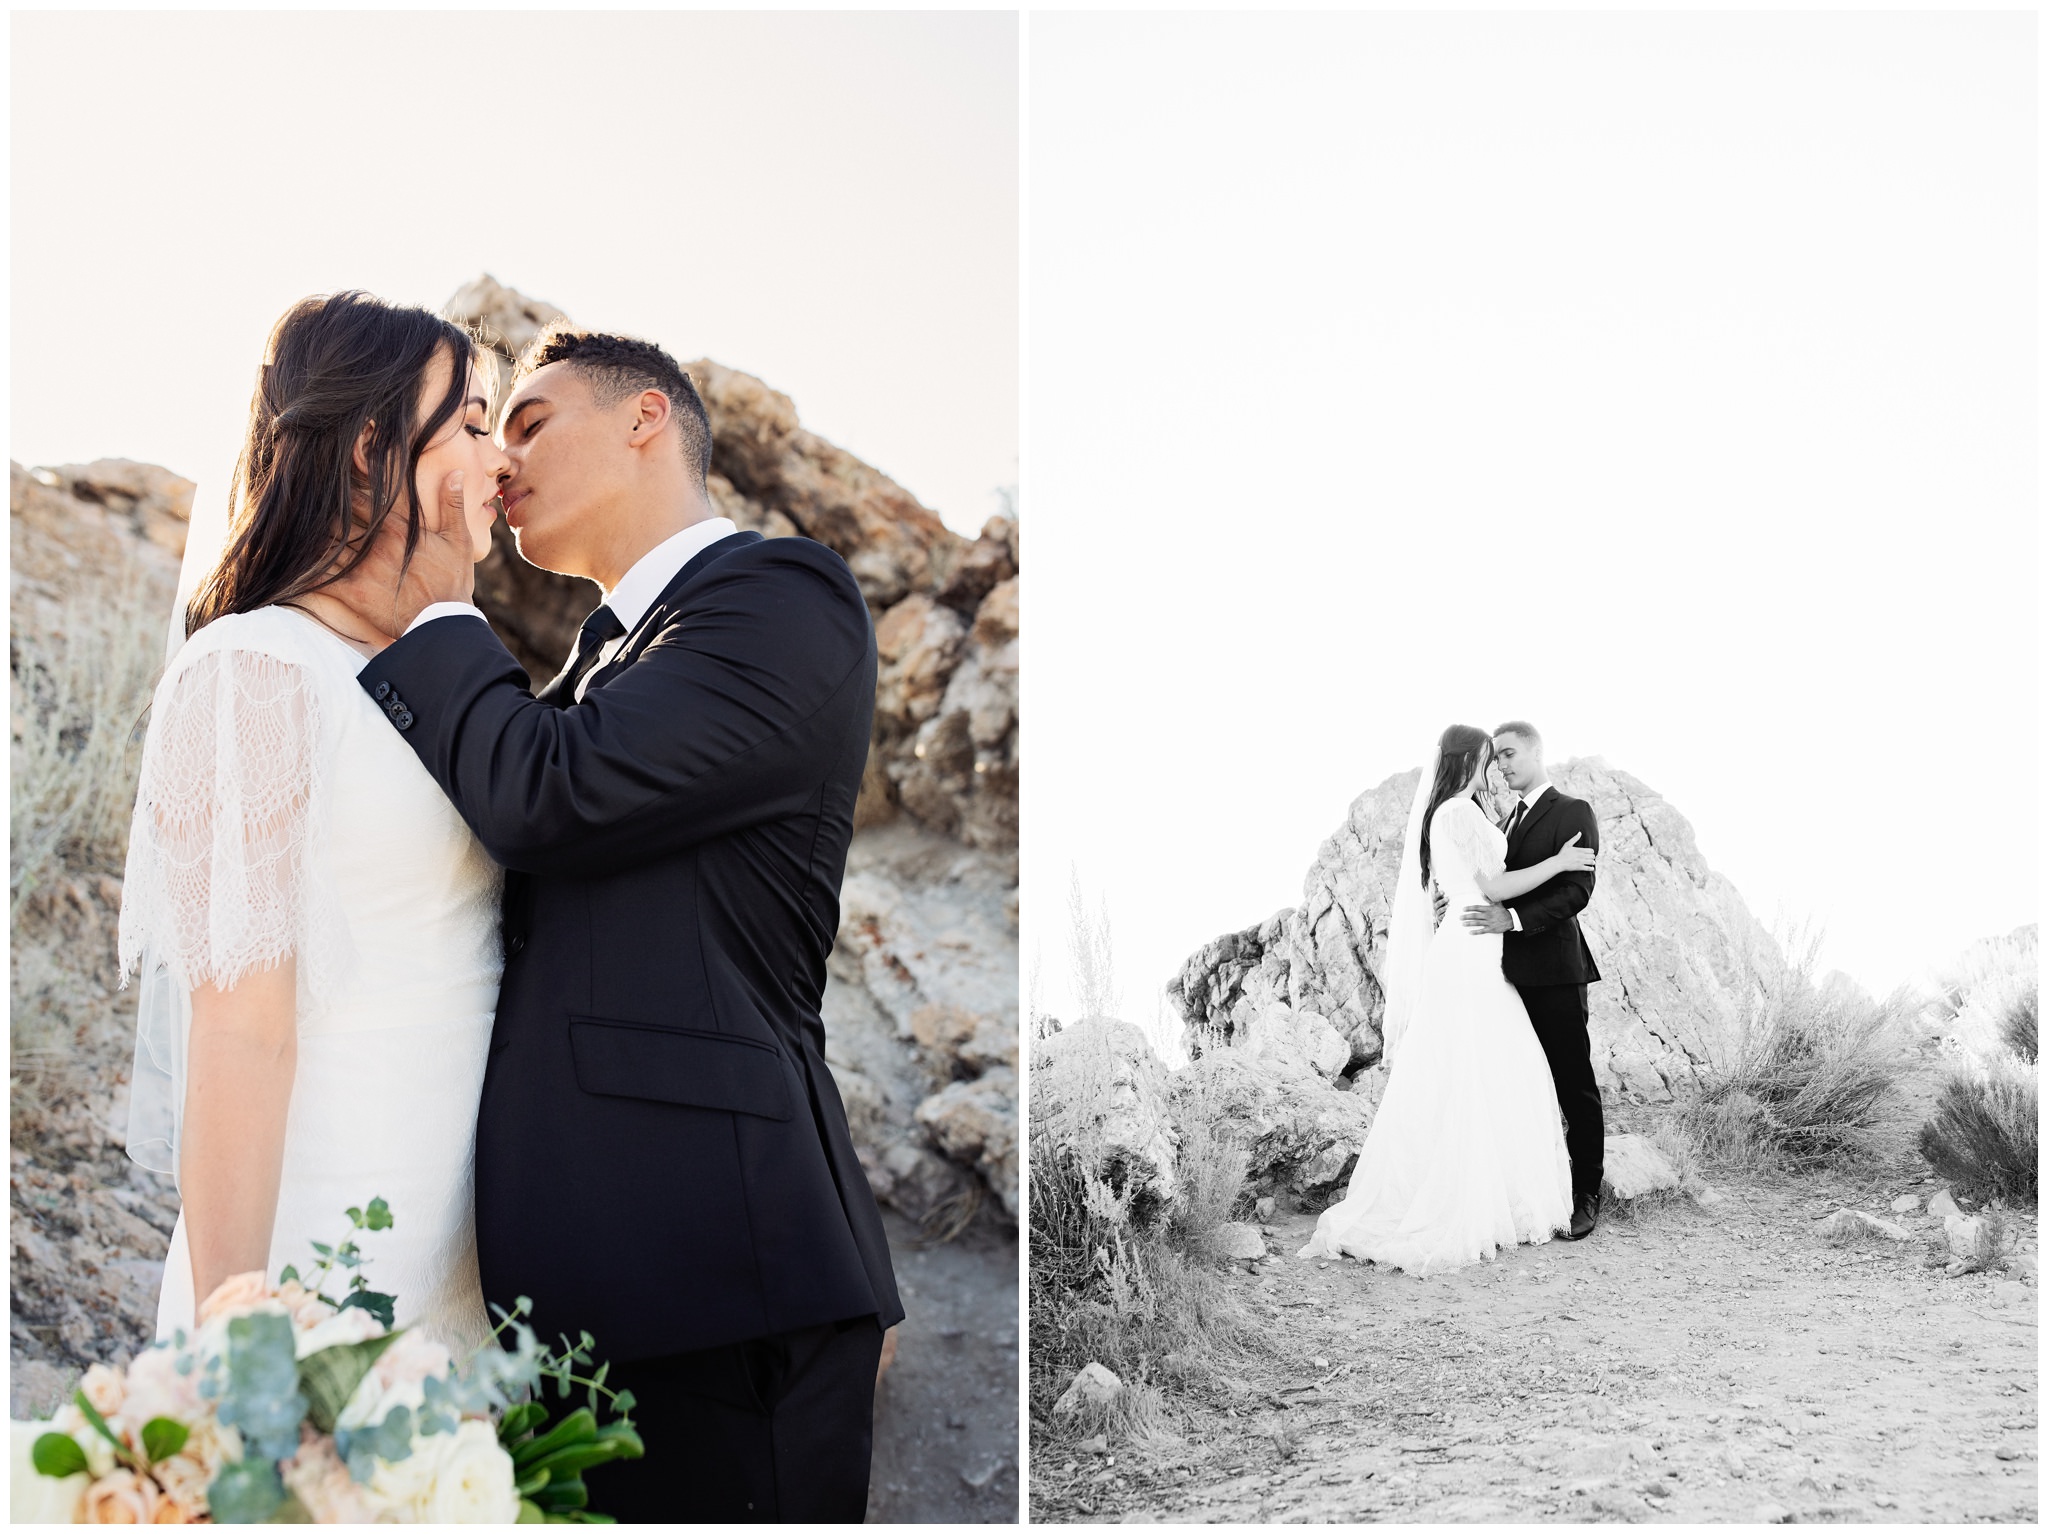 Bride and groom pictures at Ladyfinger Point at Antelope Island, Utah.